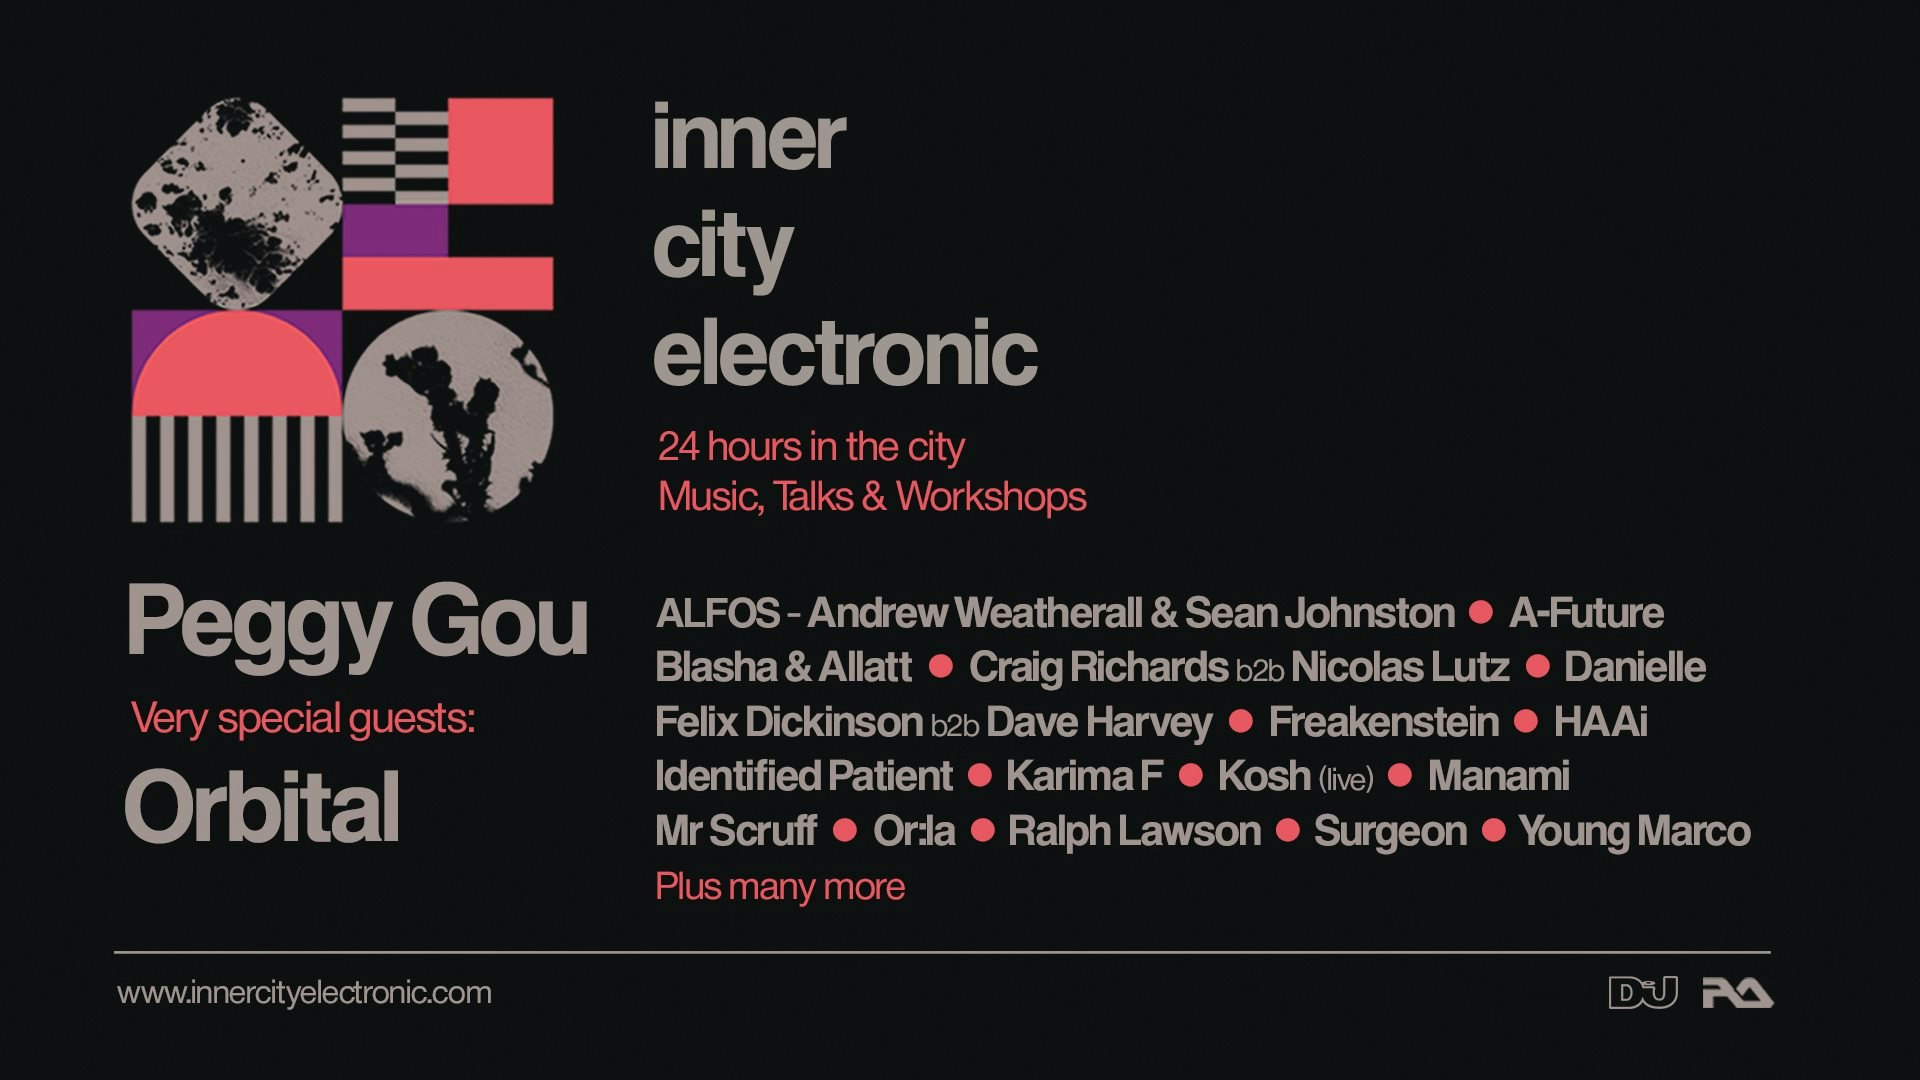 inner city electronic 2020 at The Warehouse Leeds